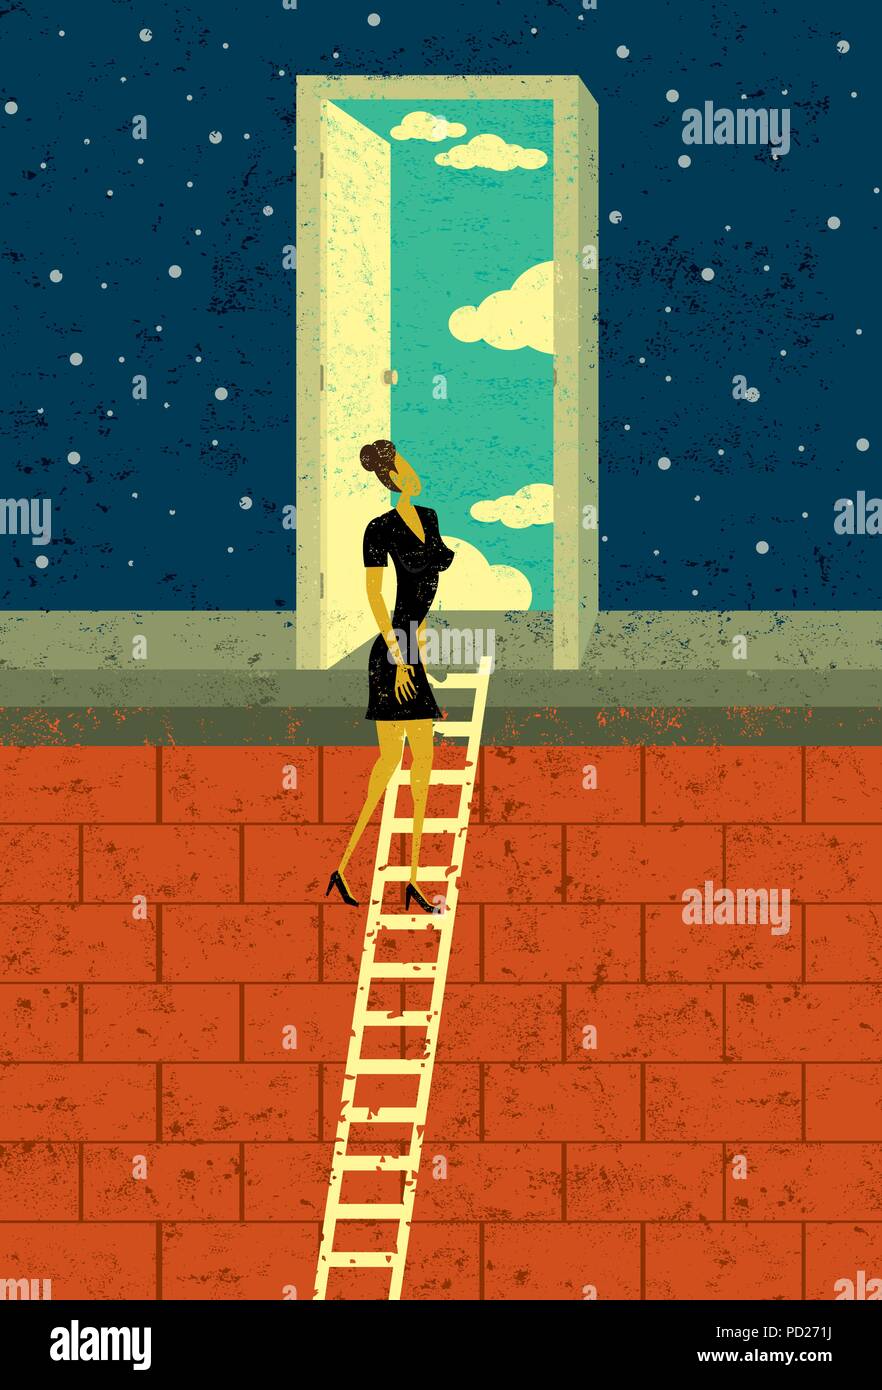 Door to Opportunity A businesswoman climbing the corporate ladder opens a door to endless possibilities. Stock Vector